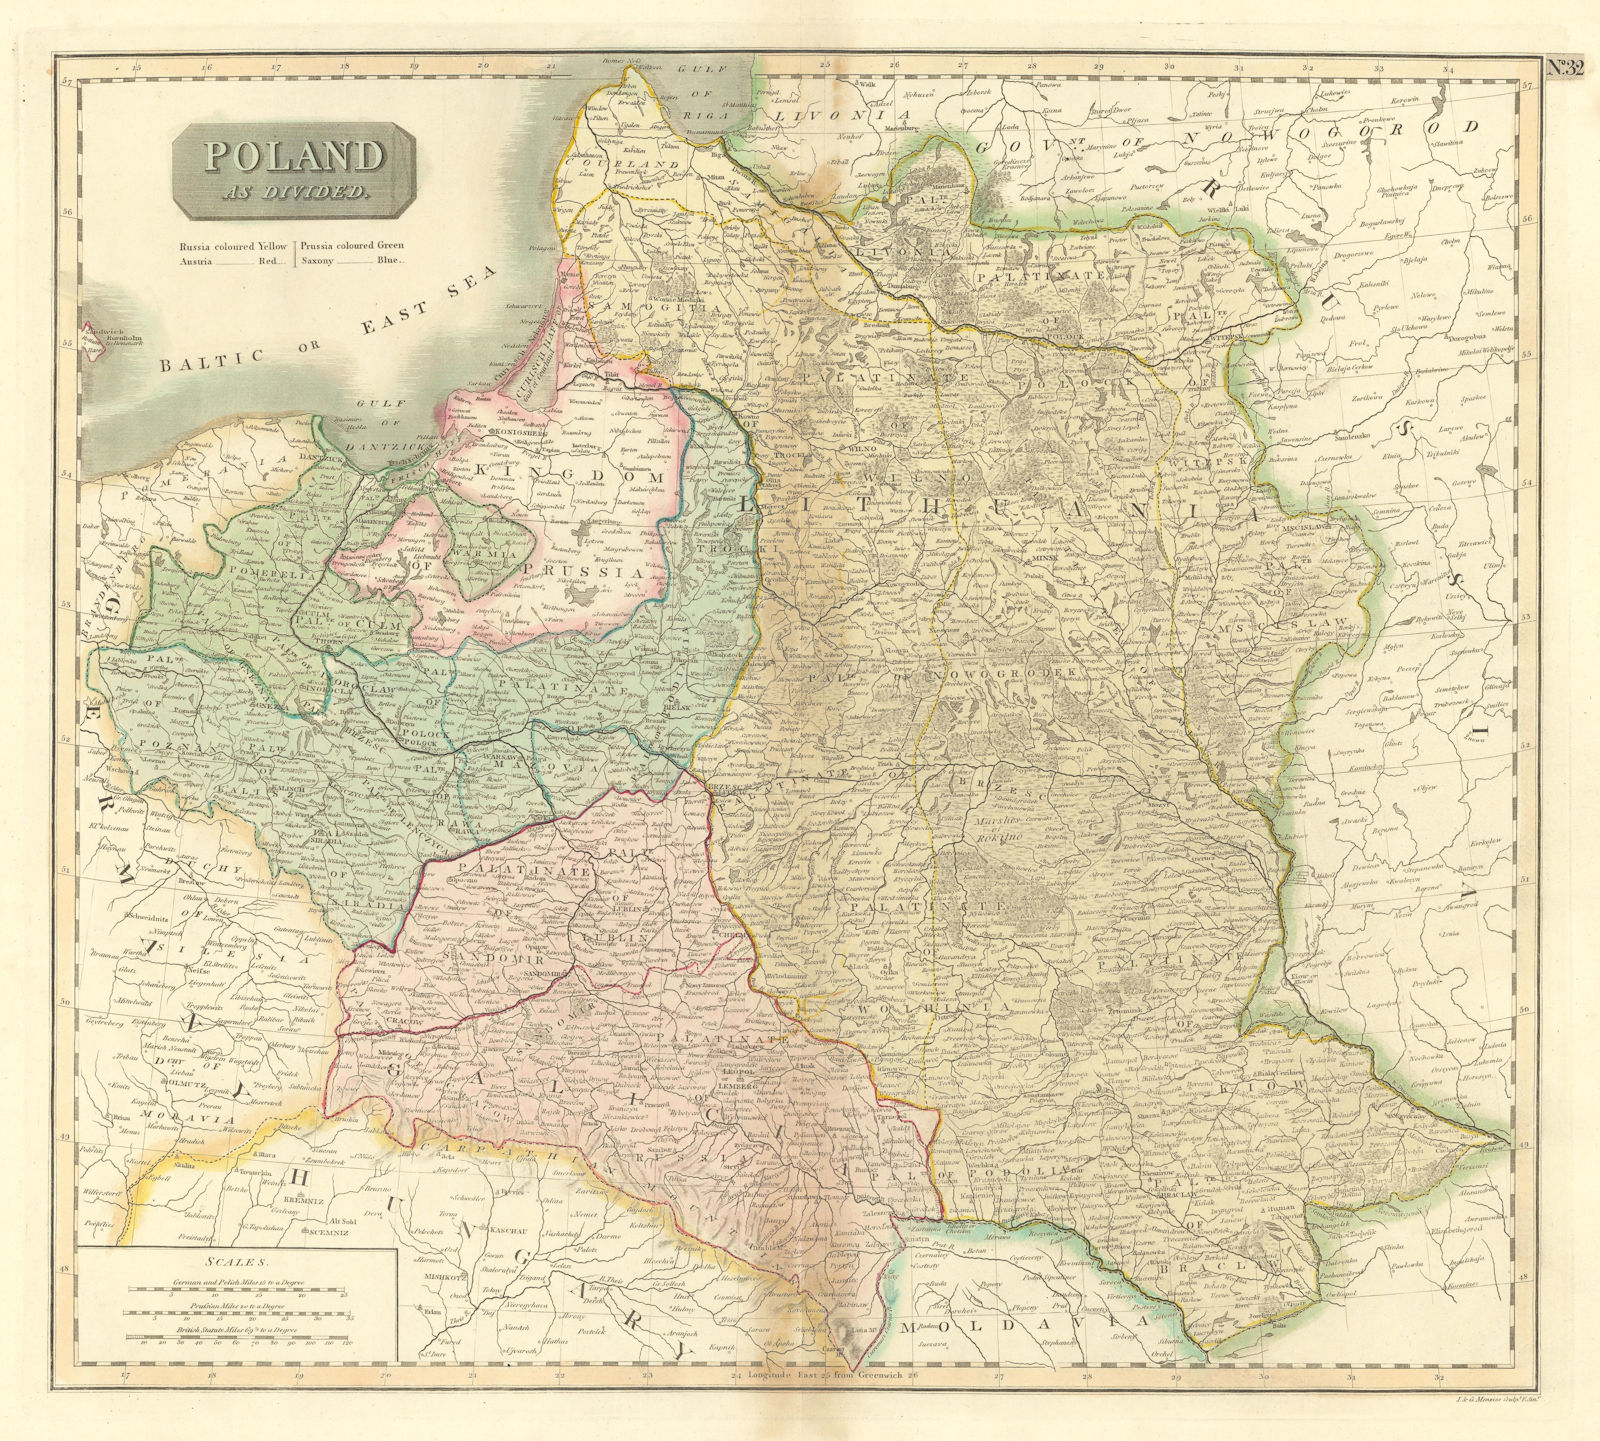 "Poland as divided". Polish-Lithuanian Commonwealth after 1795. THOMSON 1817 map